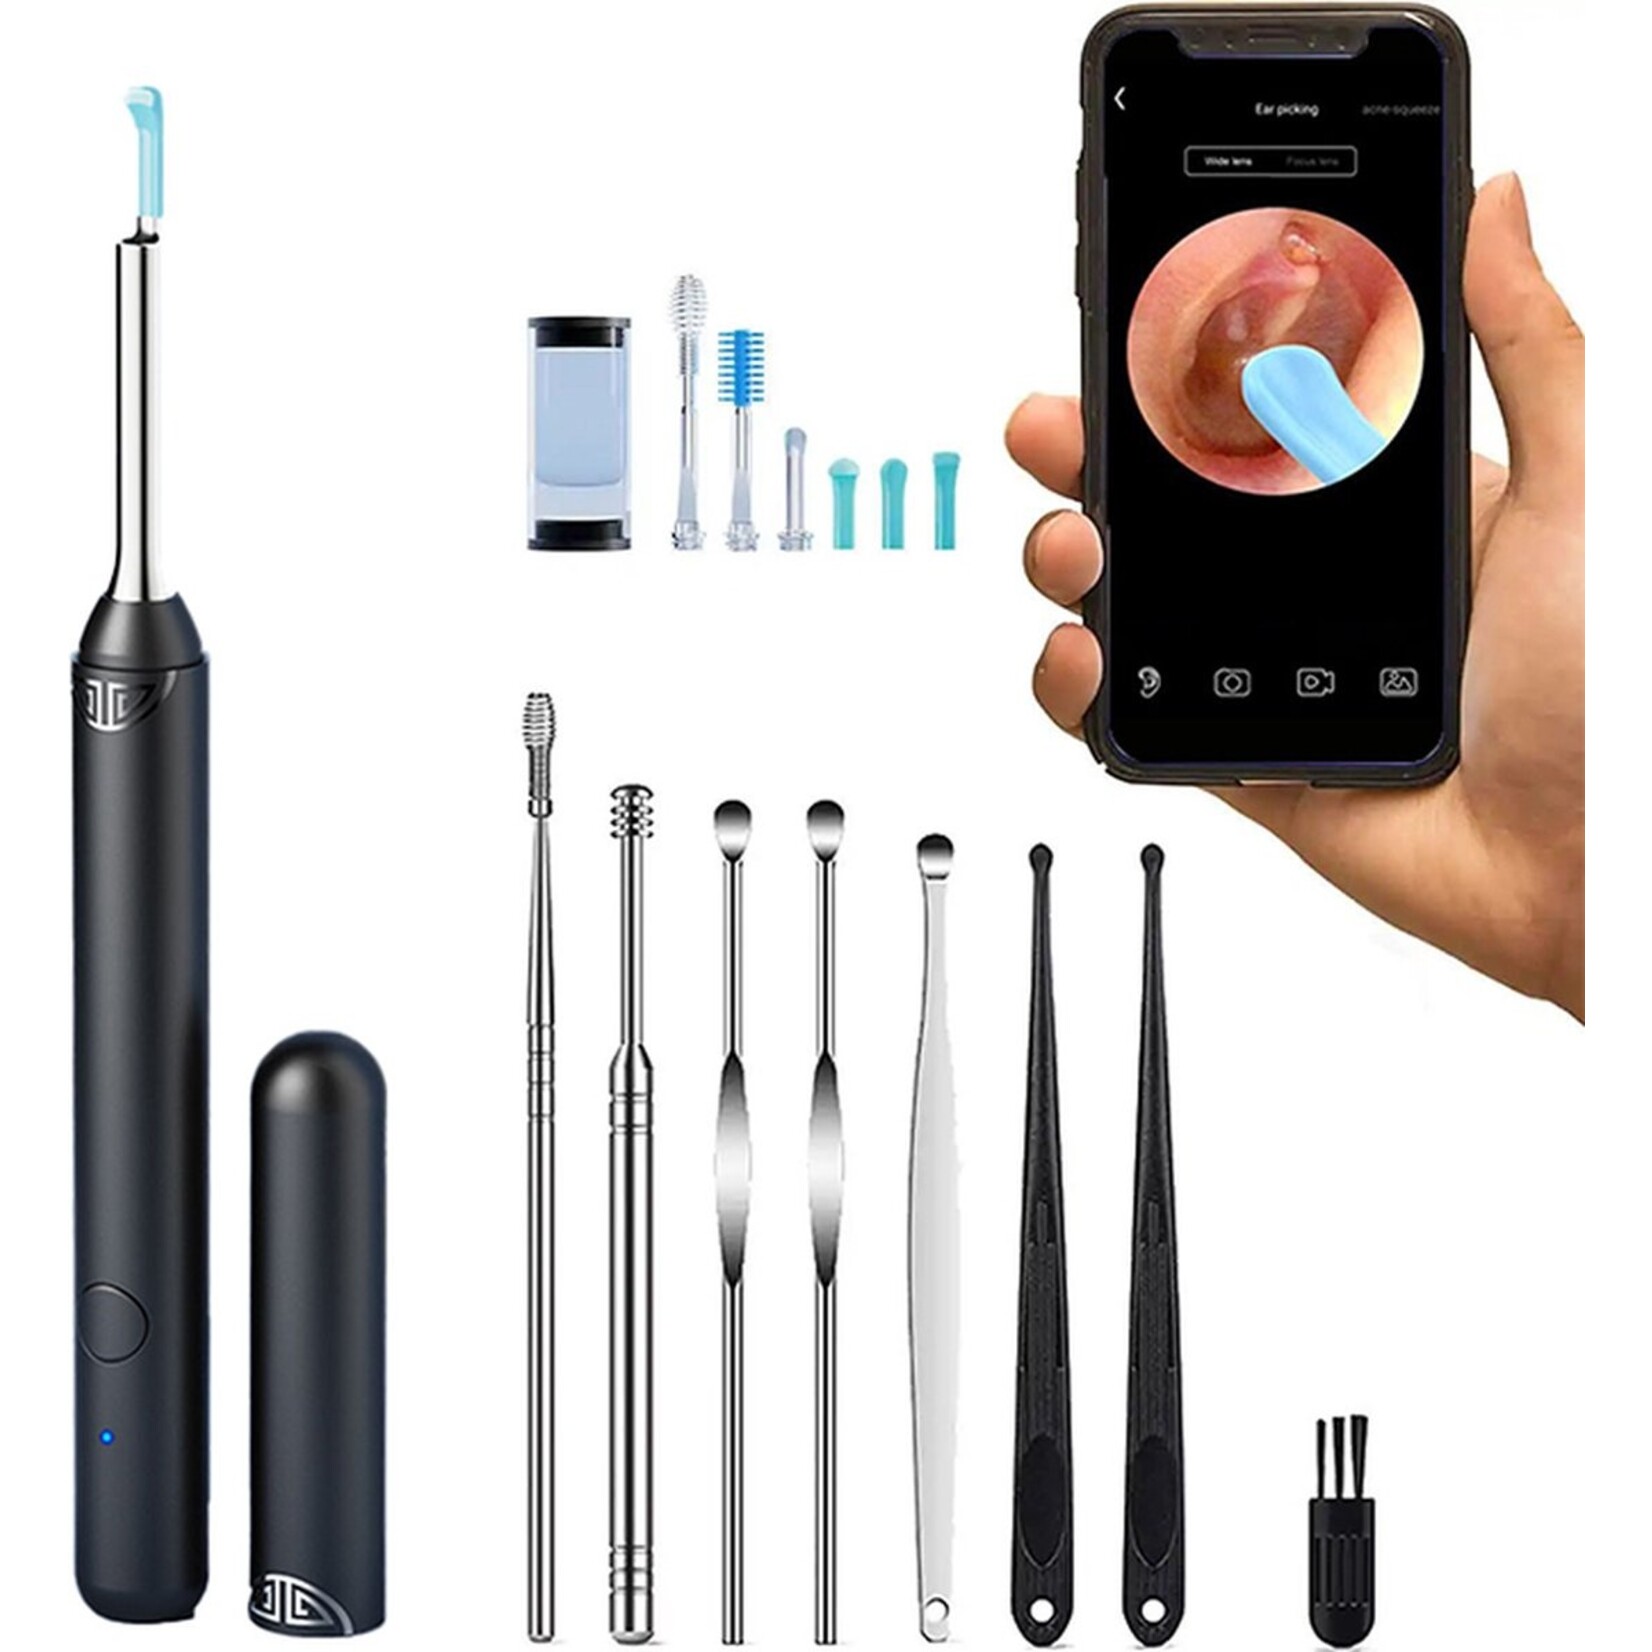 MHZ Earwax remover - With Camera - With HD Camera, Lamp & App - 1080P - Black